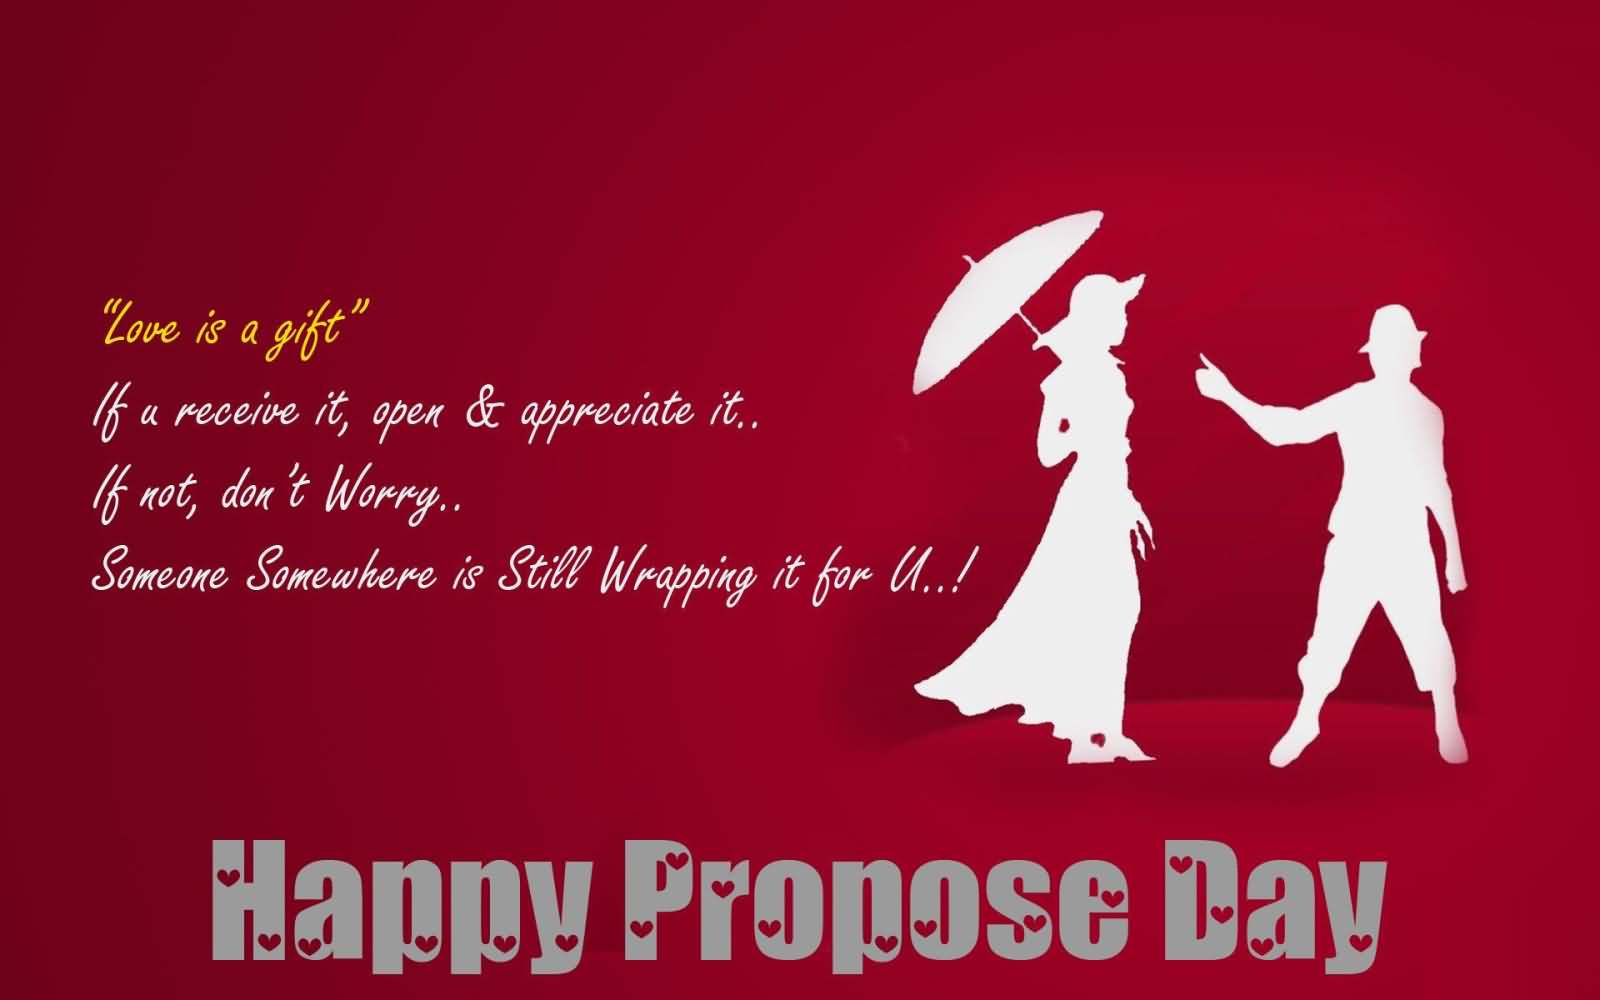 Love is a gift happy Propose Day